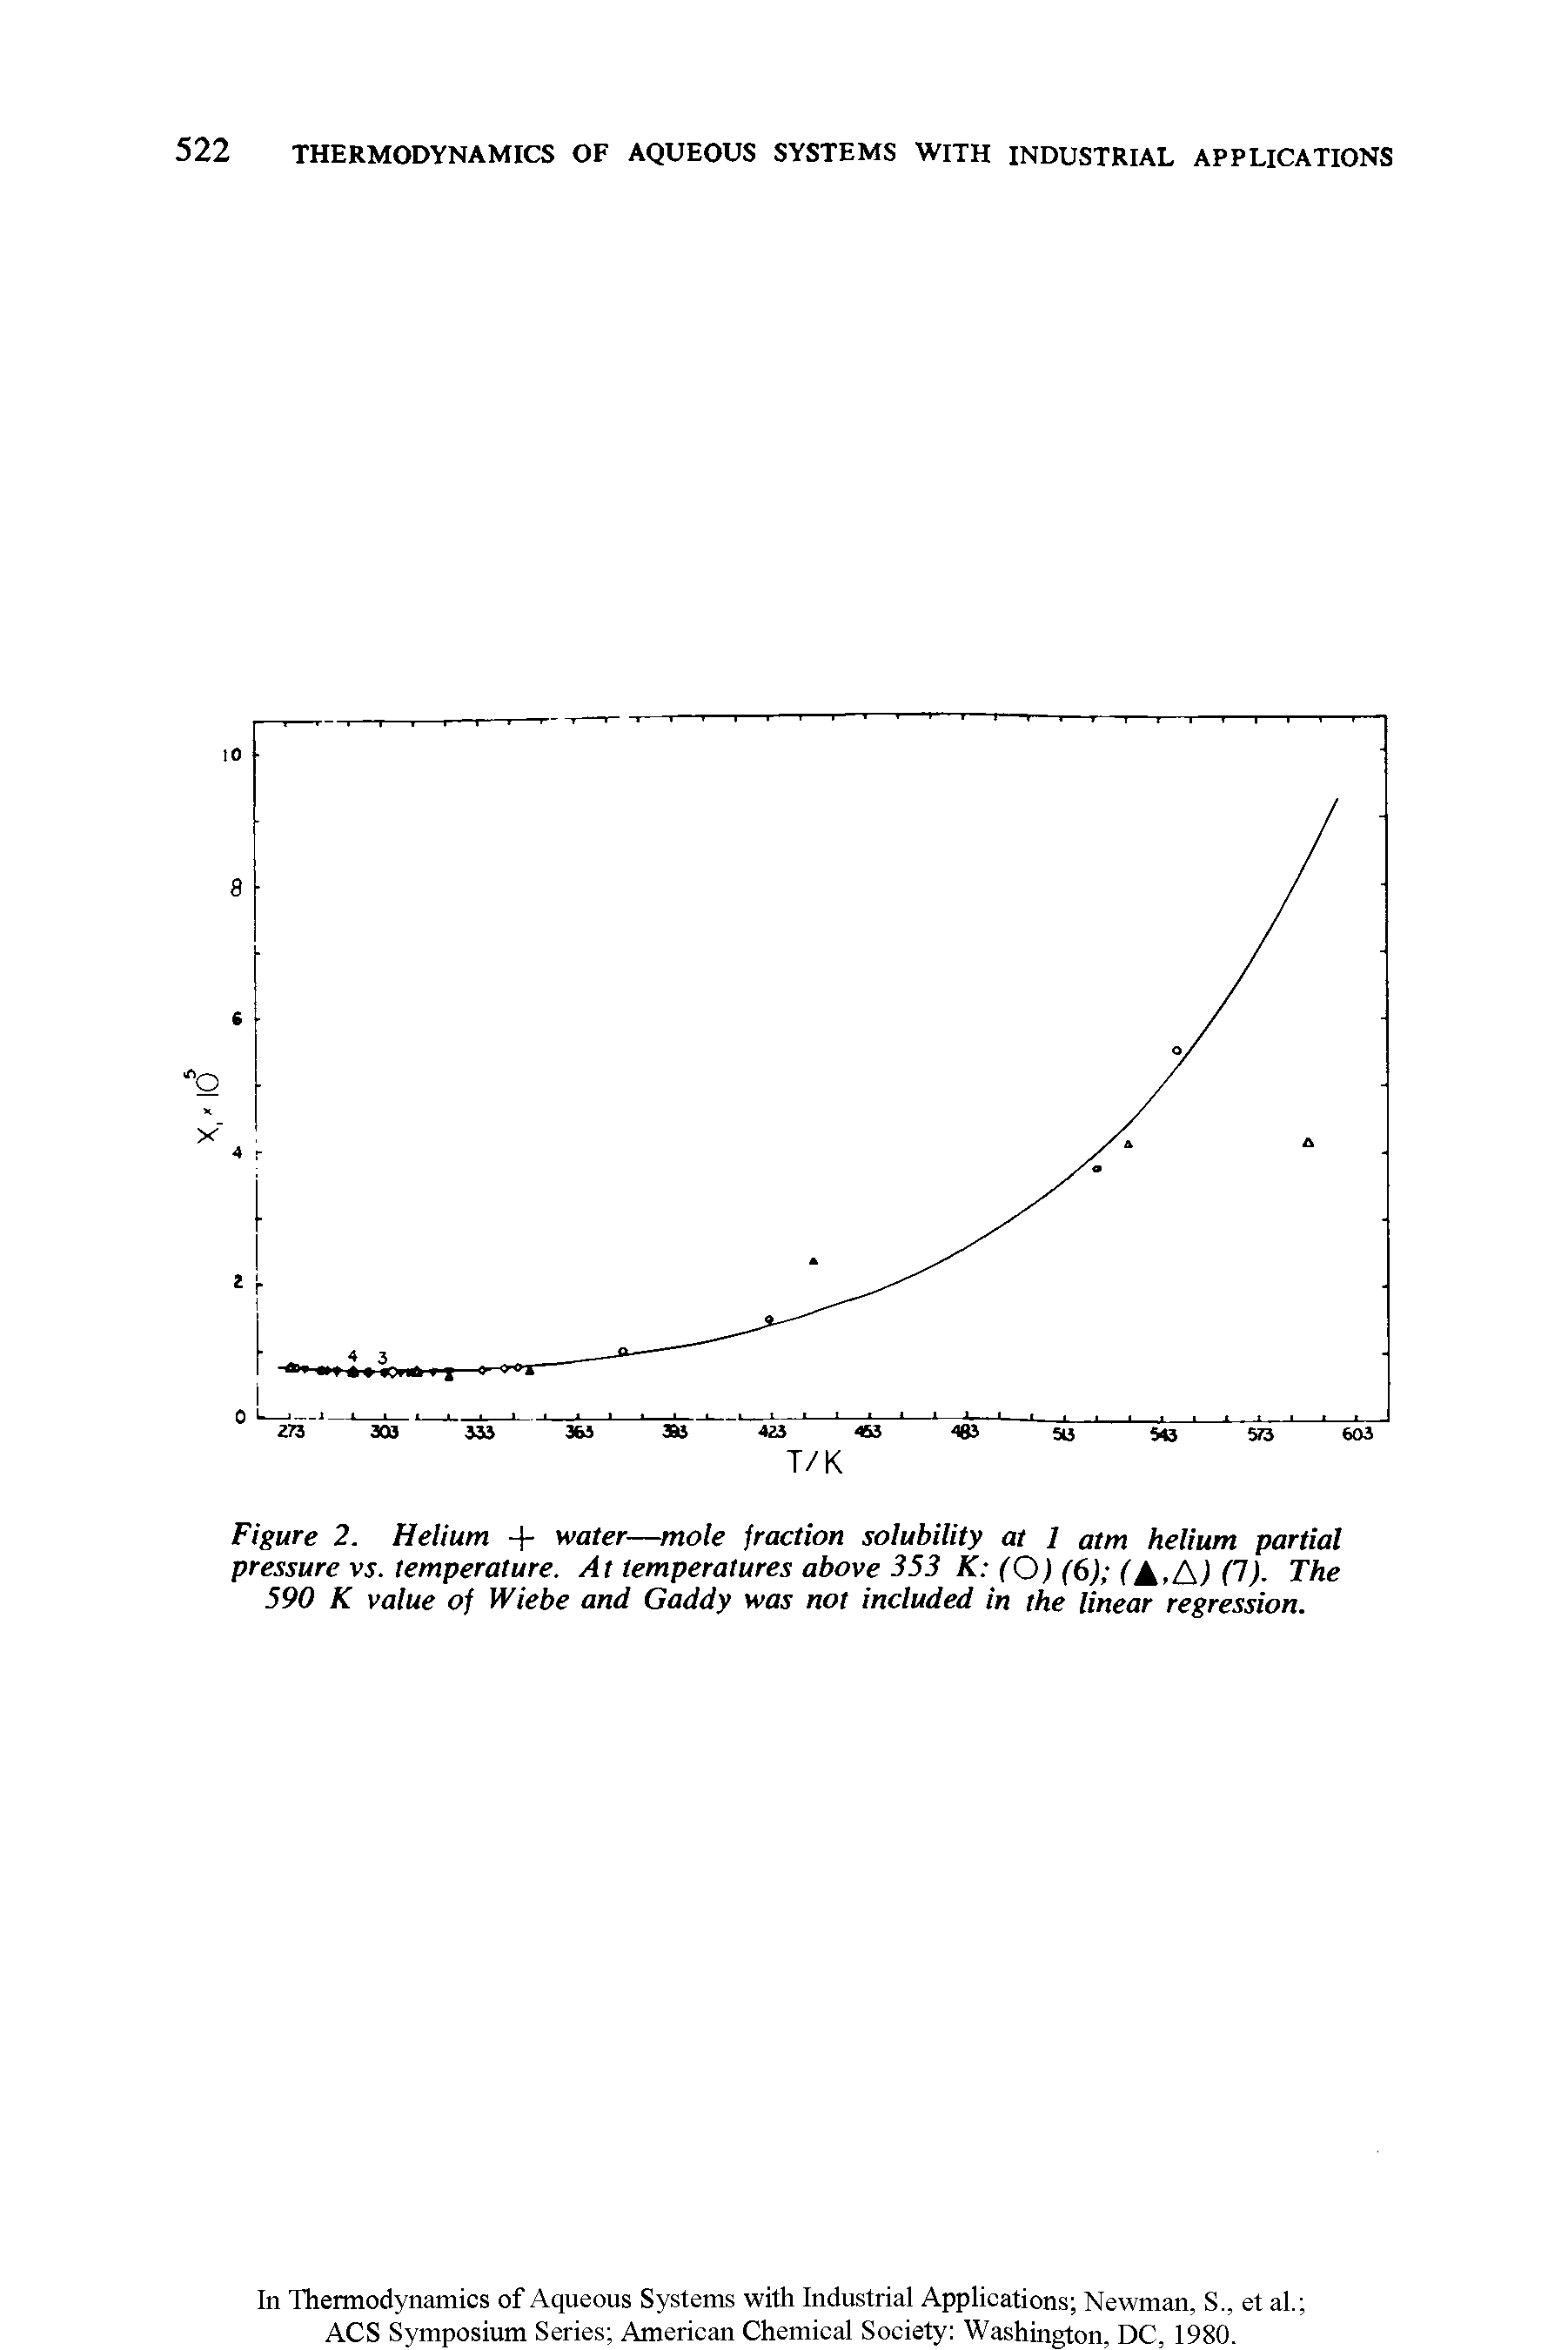 Figure 2. Helium + water—mole fraction solubility at 1 atm helium partial pressure vs. temperature. At temperatures above 353 K (O) (6) ( , ) (1). The 590 K value of Wiebe and Gaddy was not included in the linear regression.